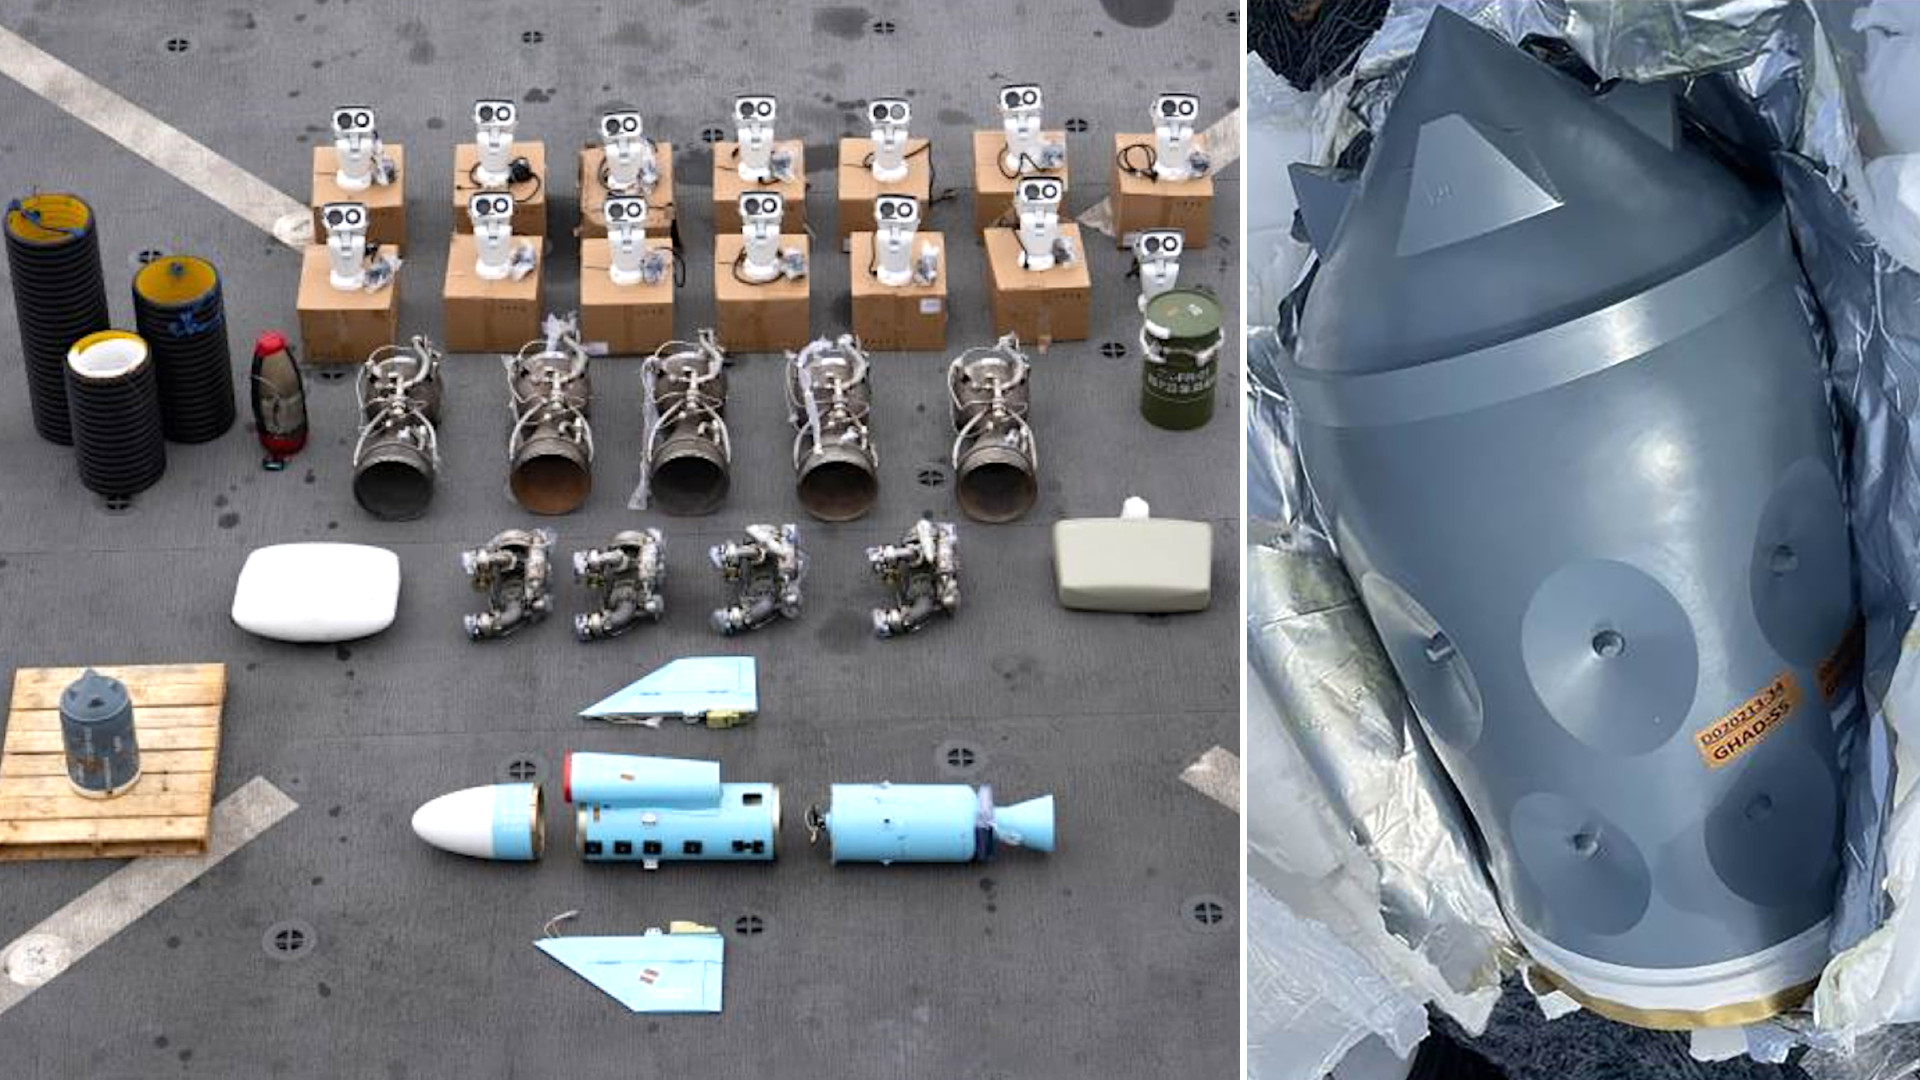 US Central Command has released pictures and information about missile parts and other materiel bound for Iranian-backed Houthi militants that it recently seized.